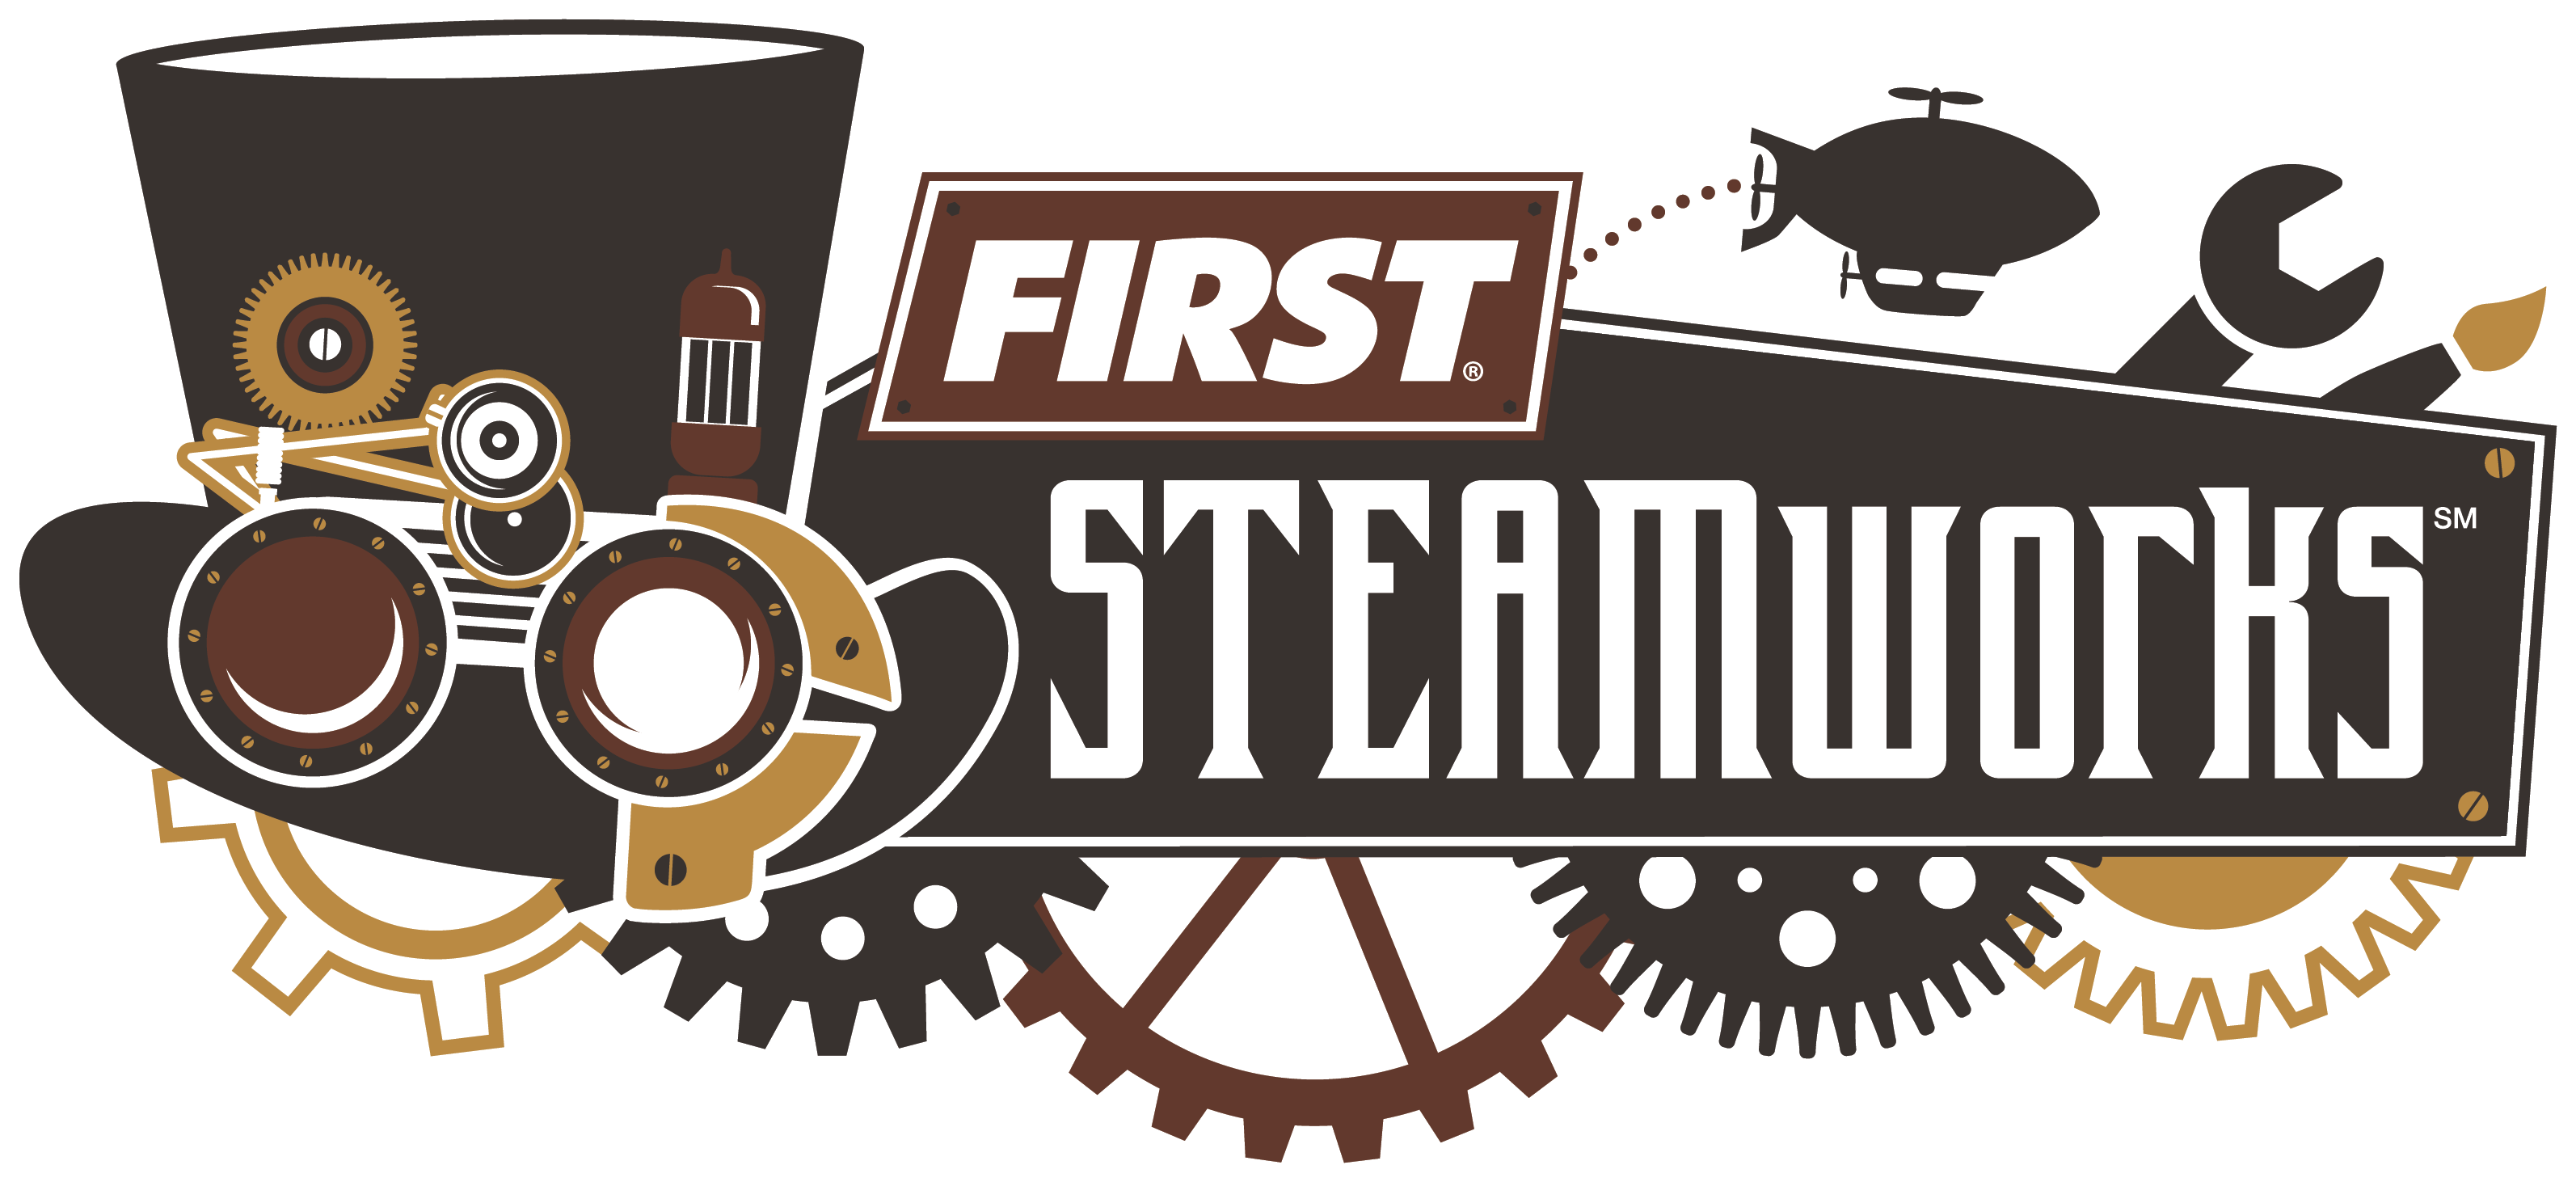 FIRST-STEAMWORKS-RGB-h.png